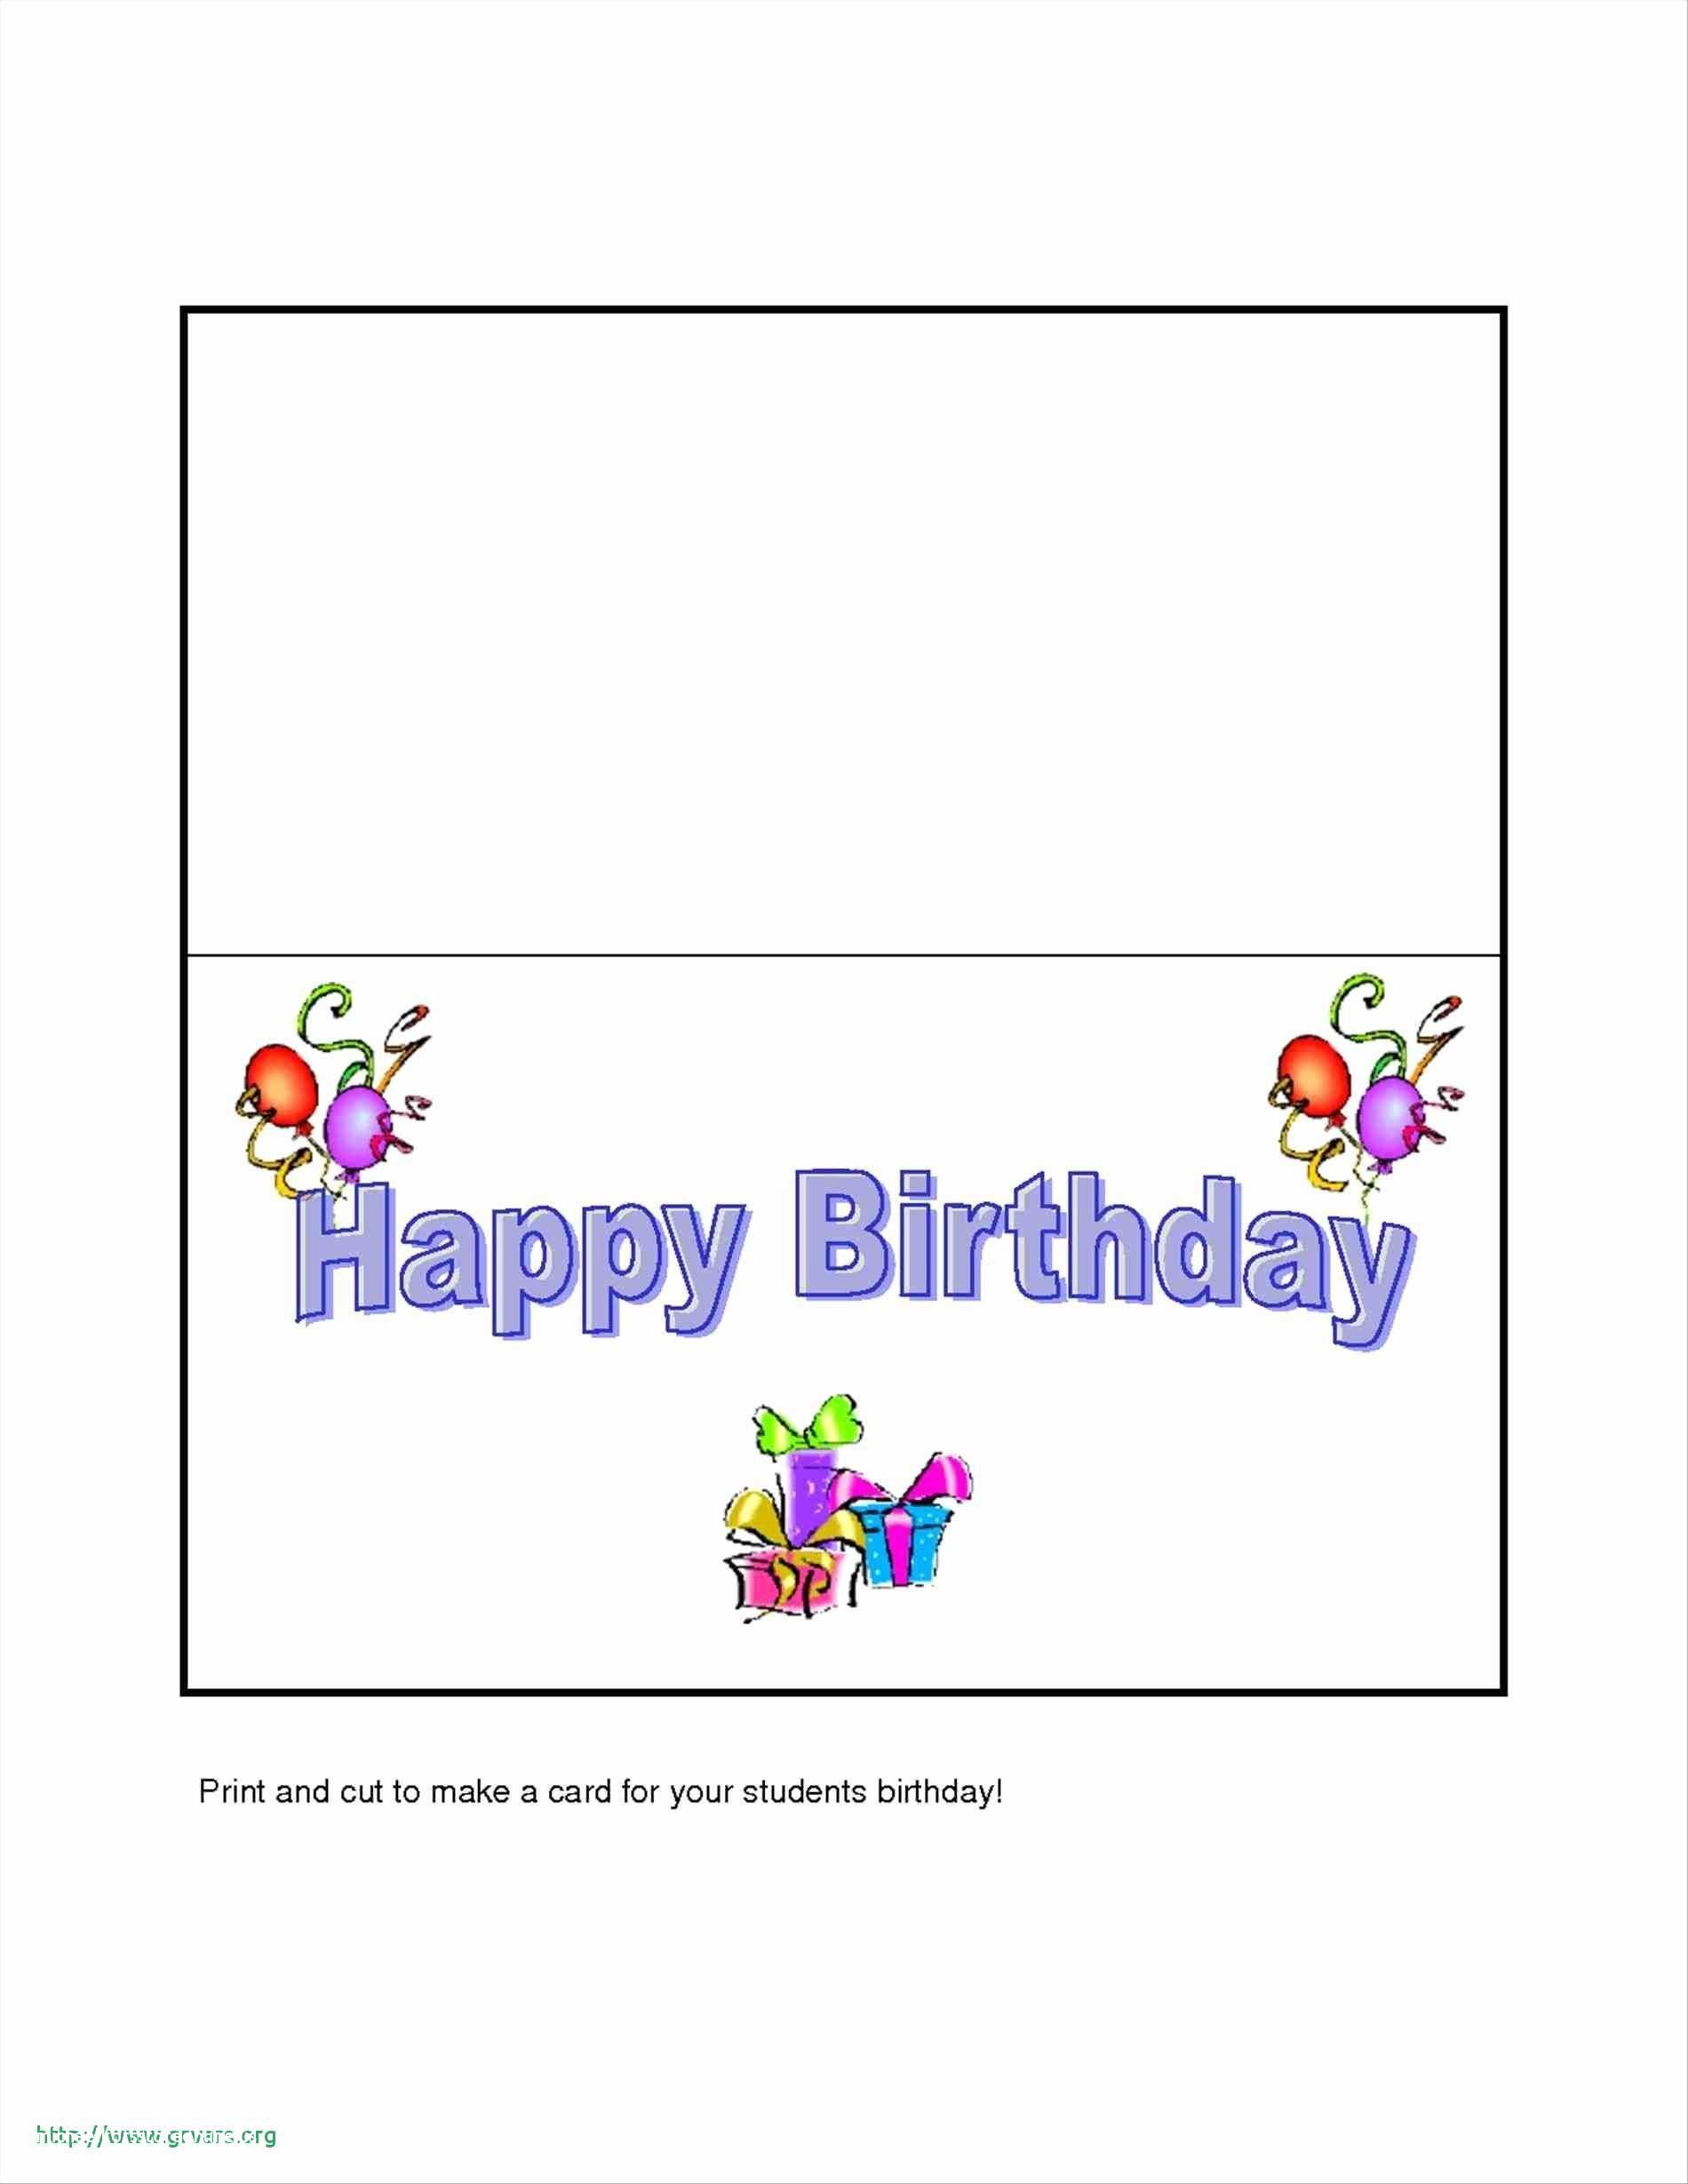 Lovely Print Christmas Cards Online | Birthday Card | Greeting Card - Free Printable Happy Birthday Cards Online